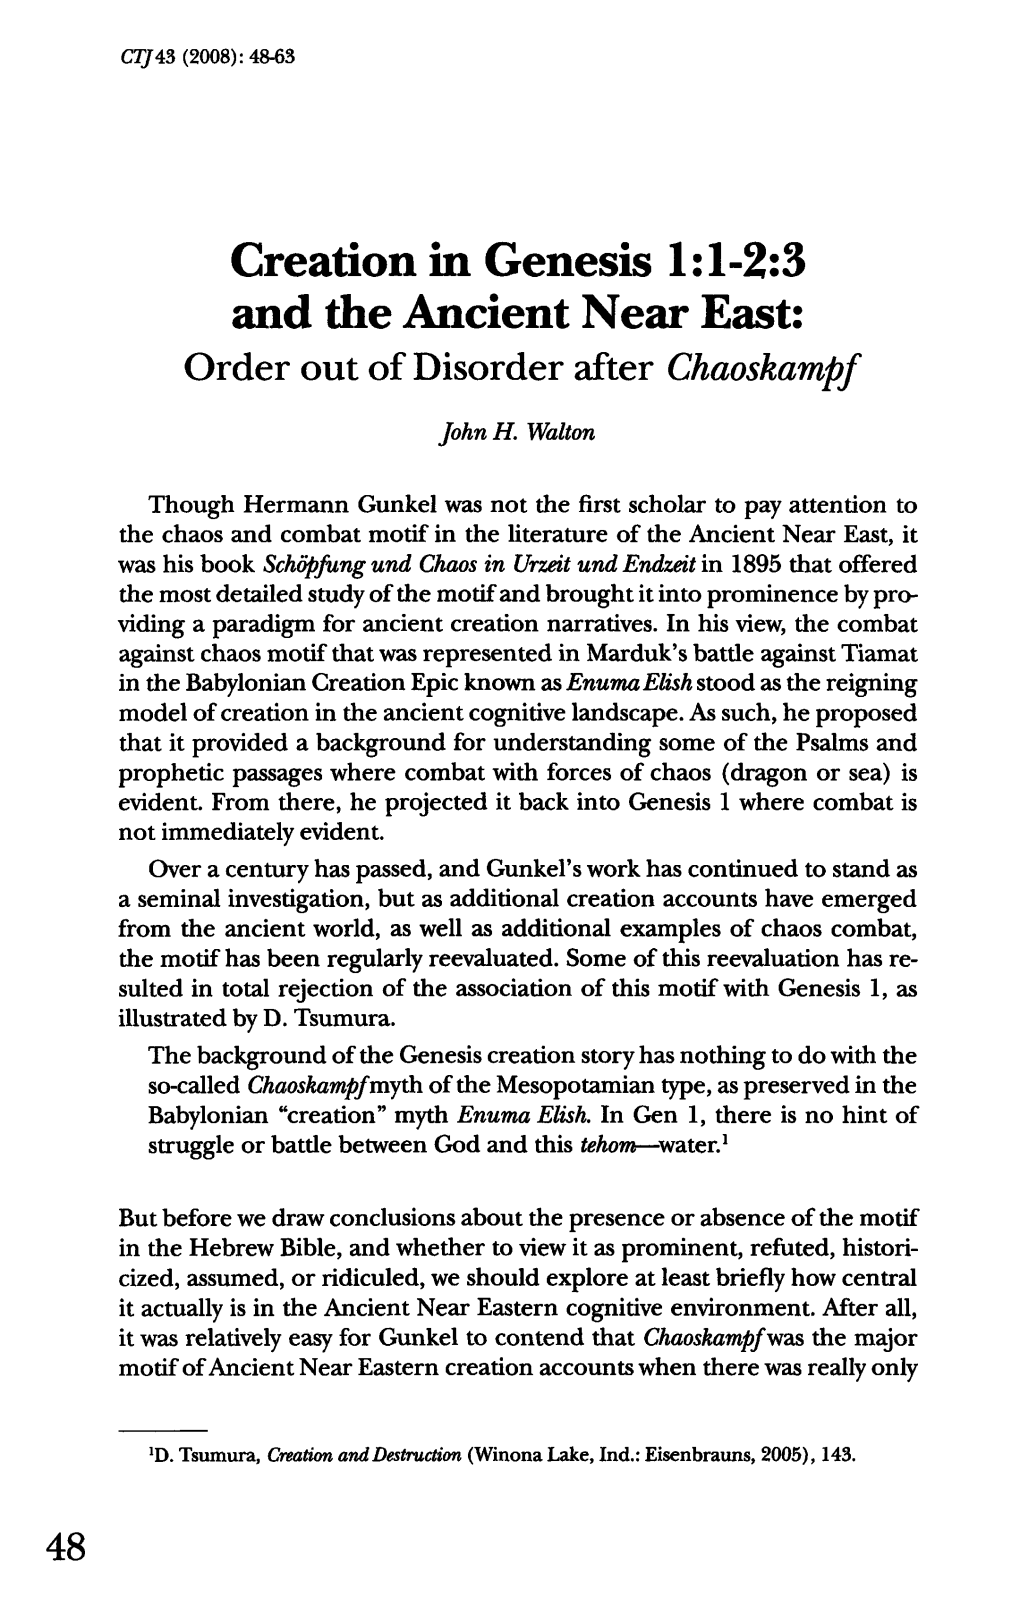 Creation in Genesis 1:1-2:3 and the Ancient Near East: Order out of Disorder After Chaoskampf